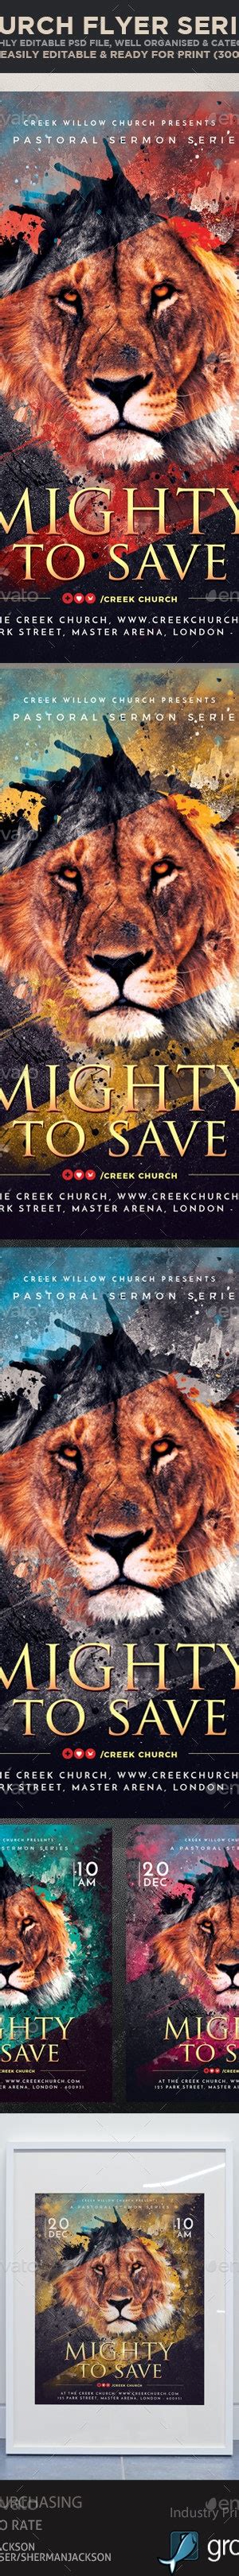 Church Themed Event Flyer Mighty To Save By Shermanjackson Graphicriver